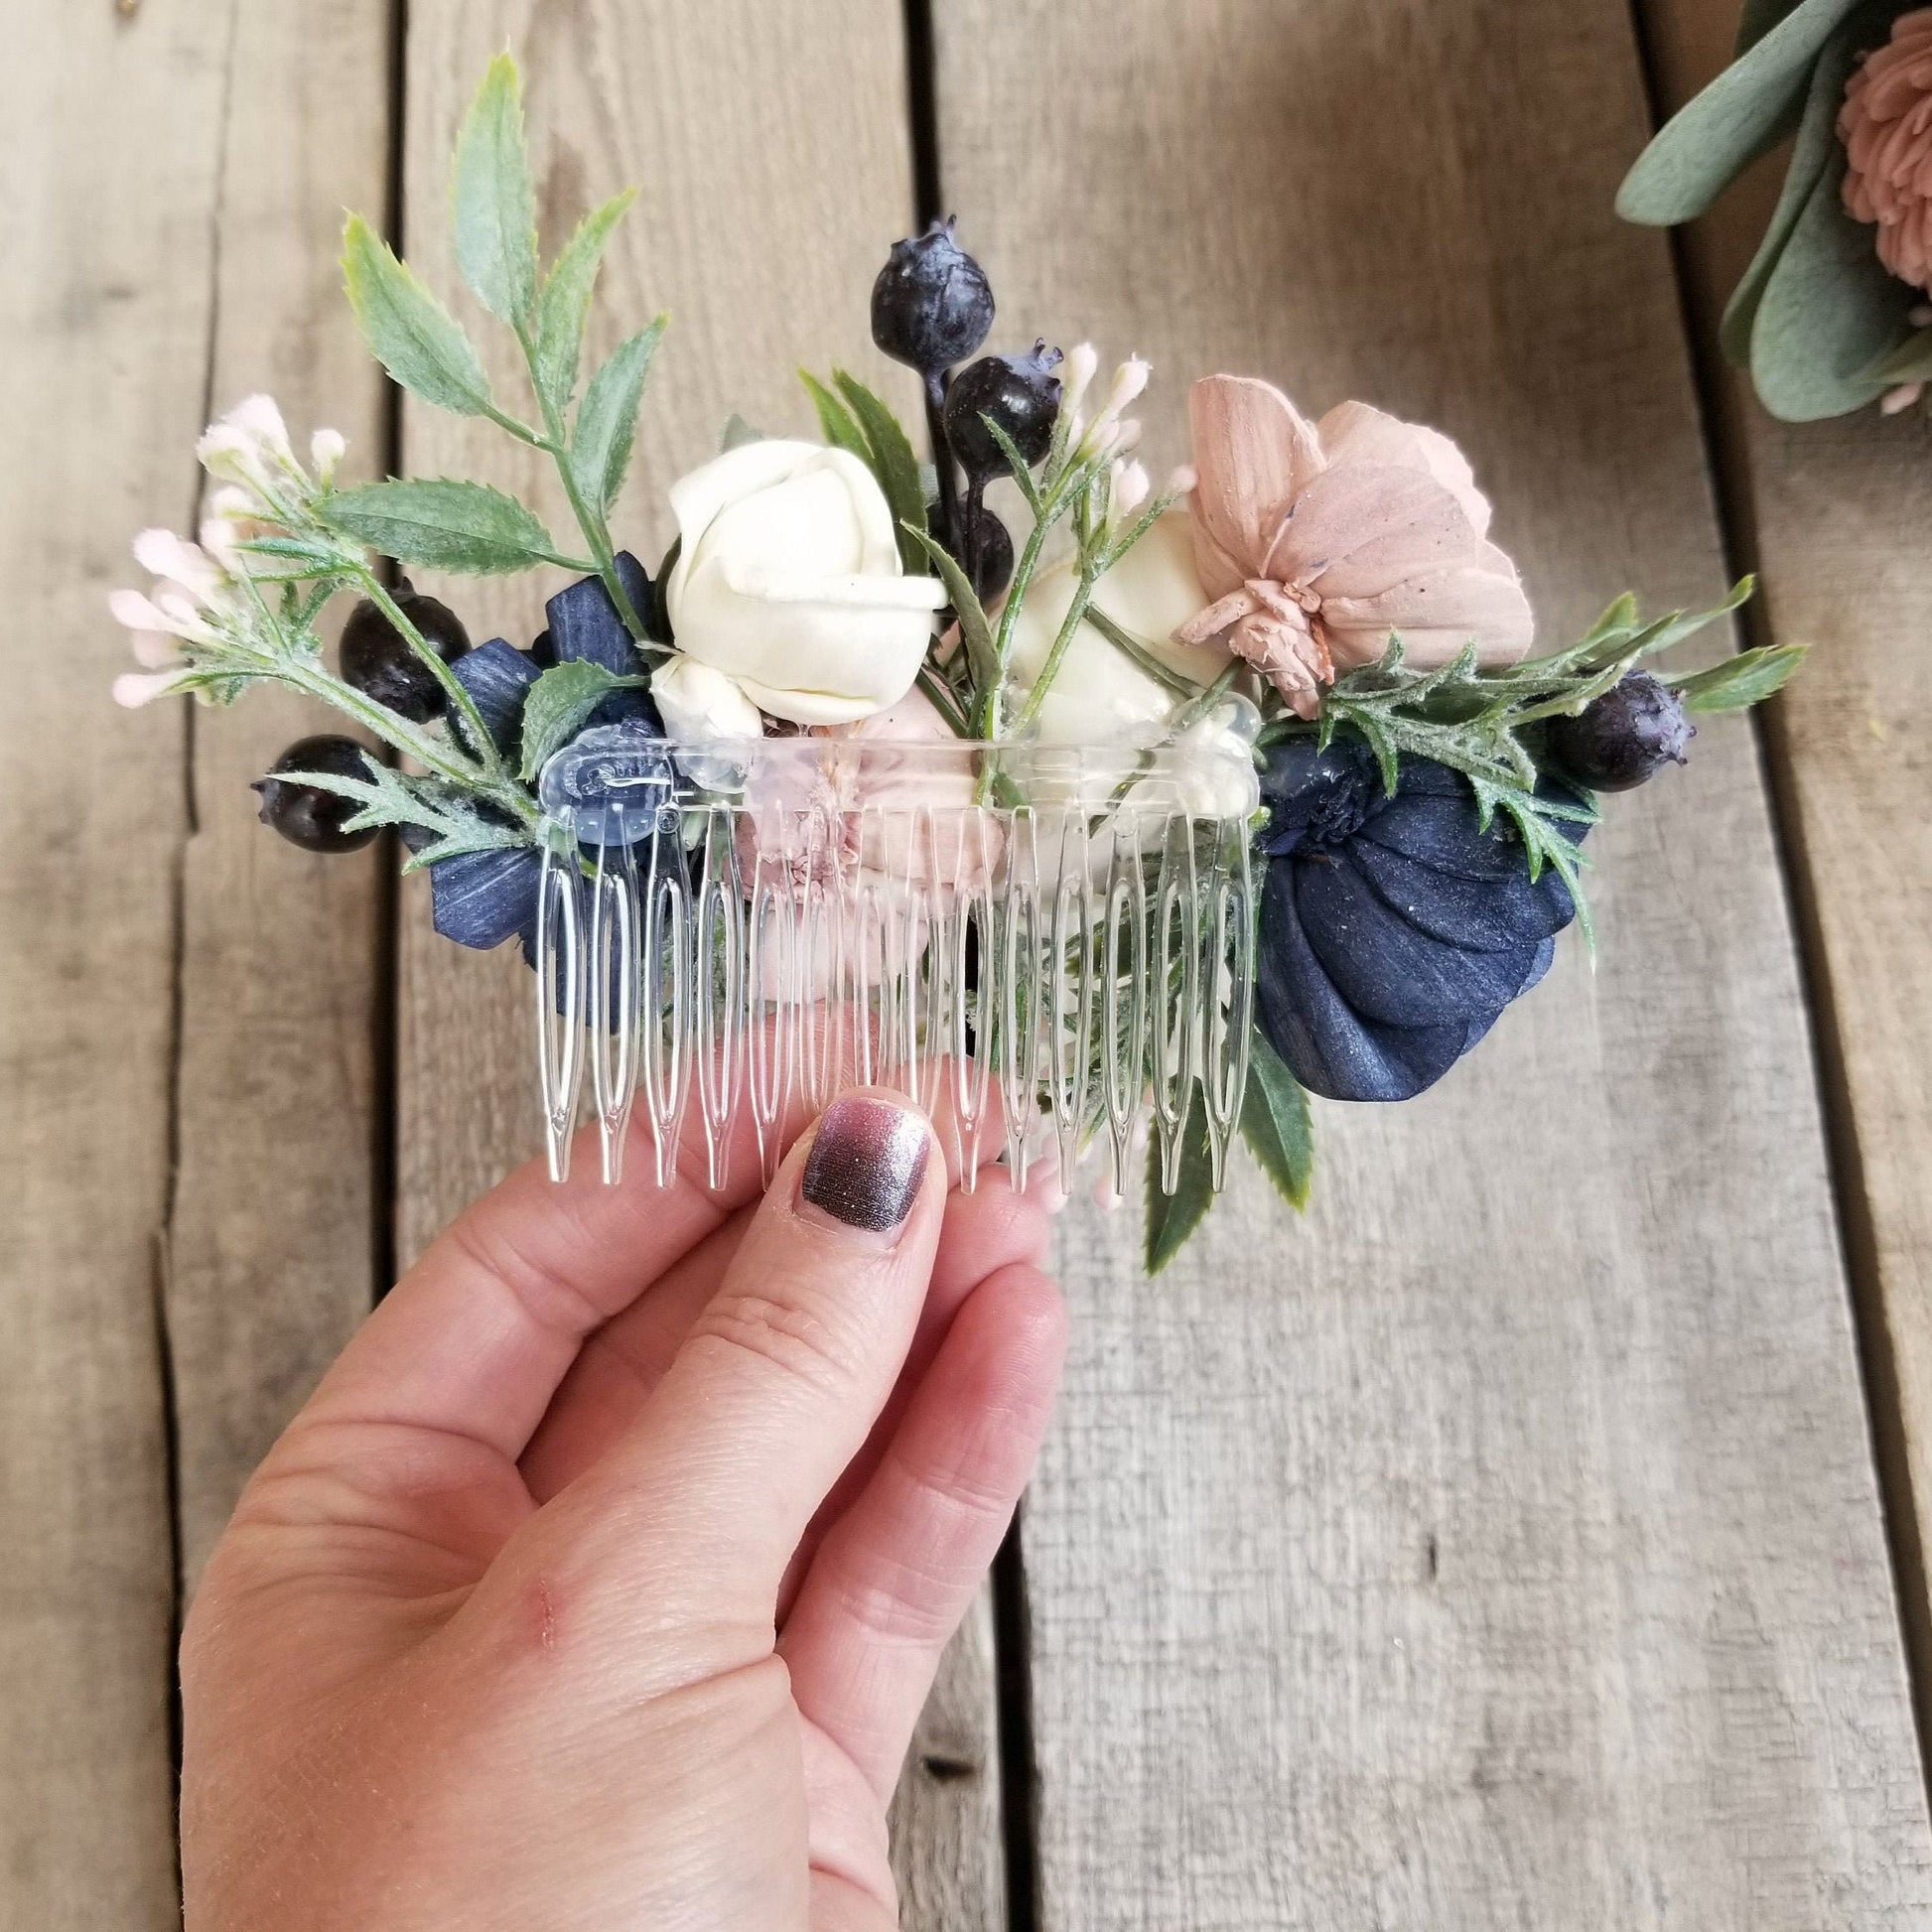 Bridal Hair Comb with Wood Flowers, Navy and Blush Wedding Flowers, Flower Comb for Bride, Bridal Updo Hair Piece